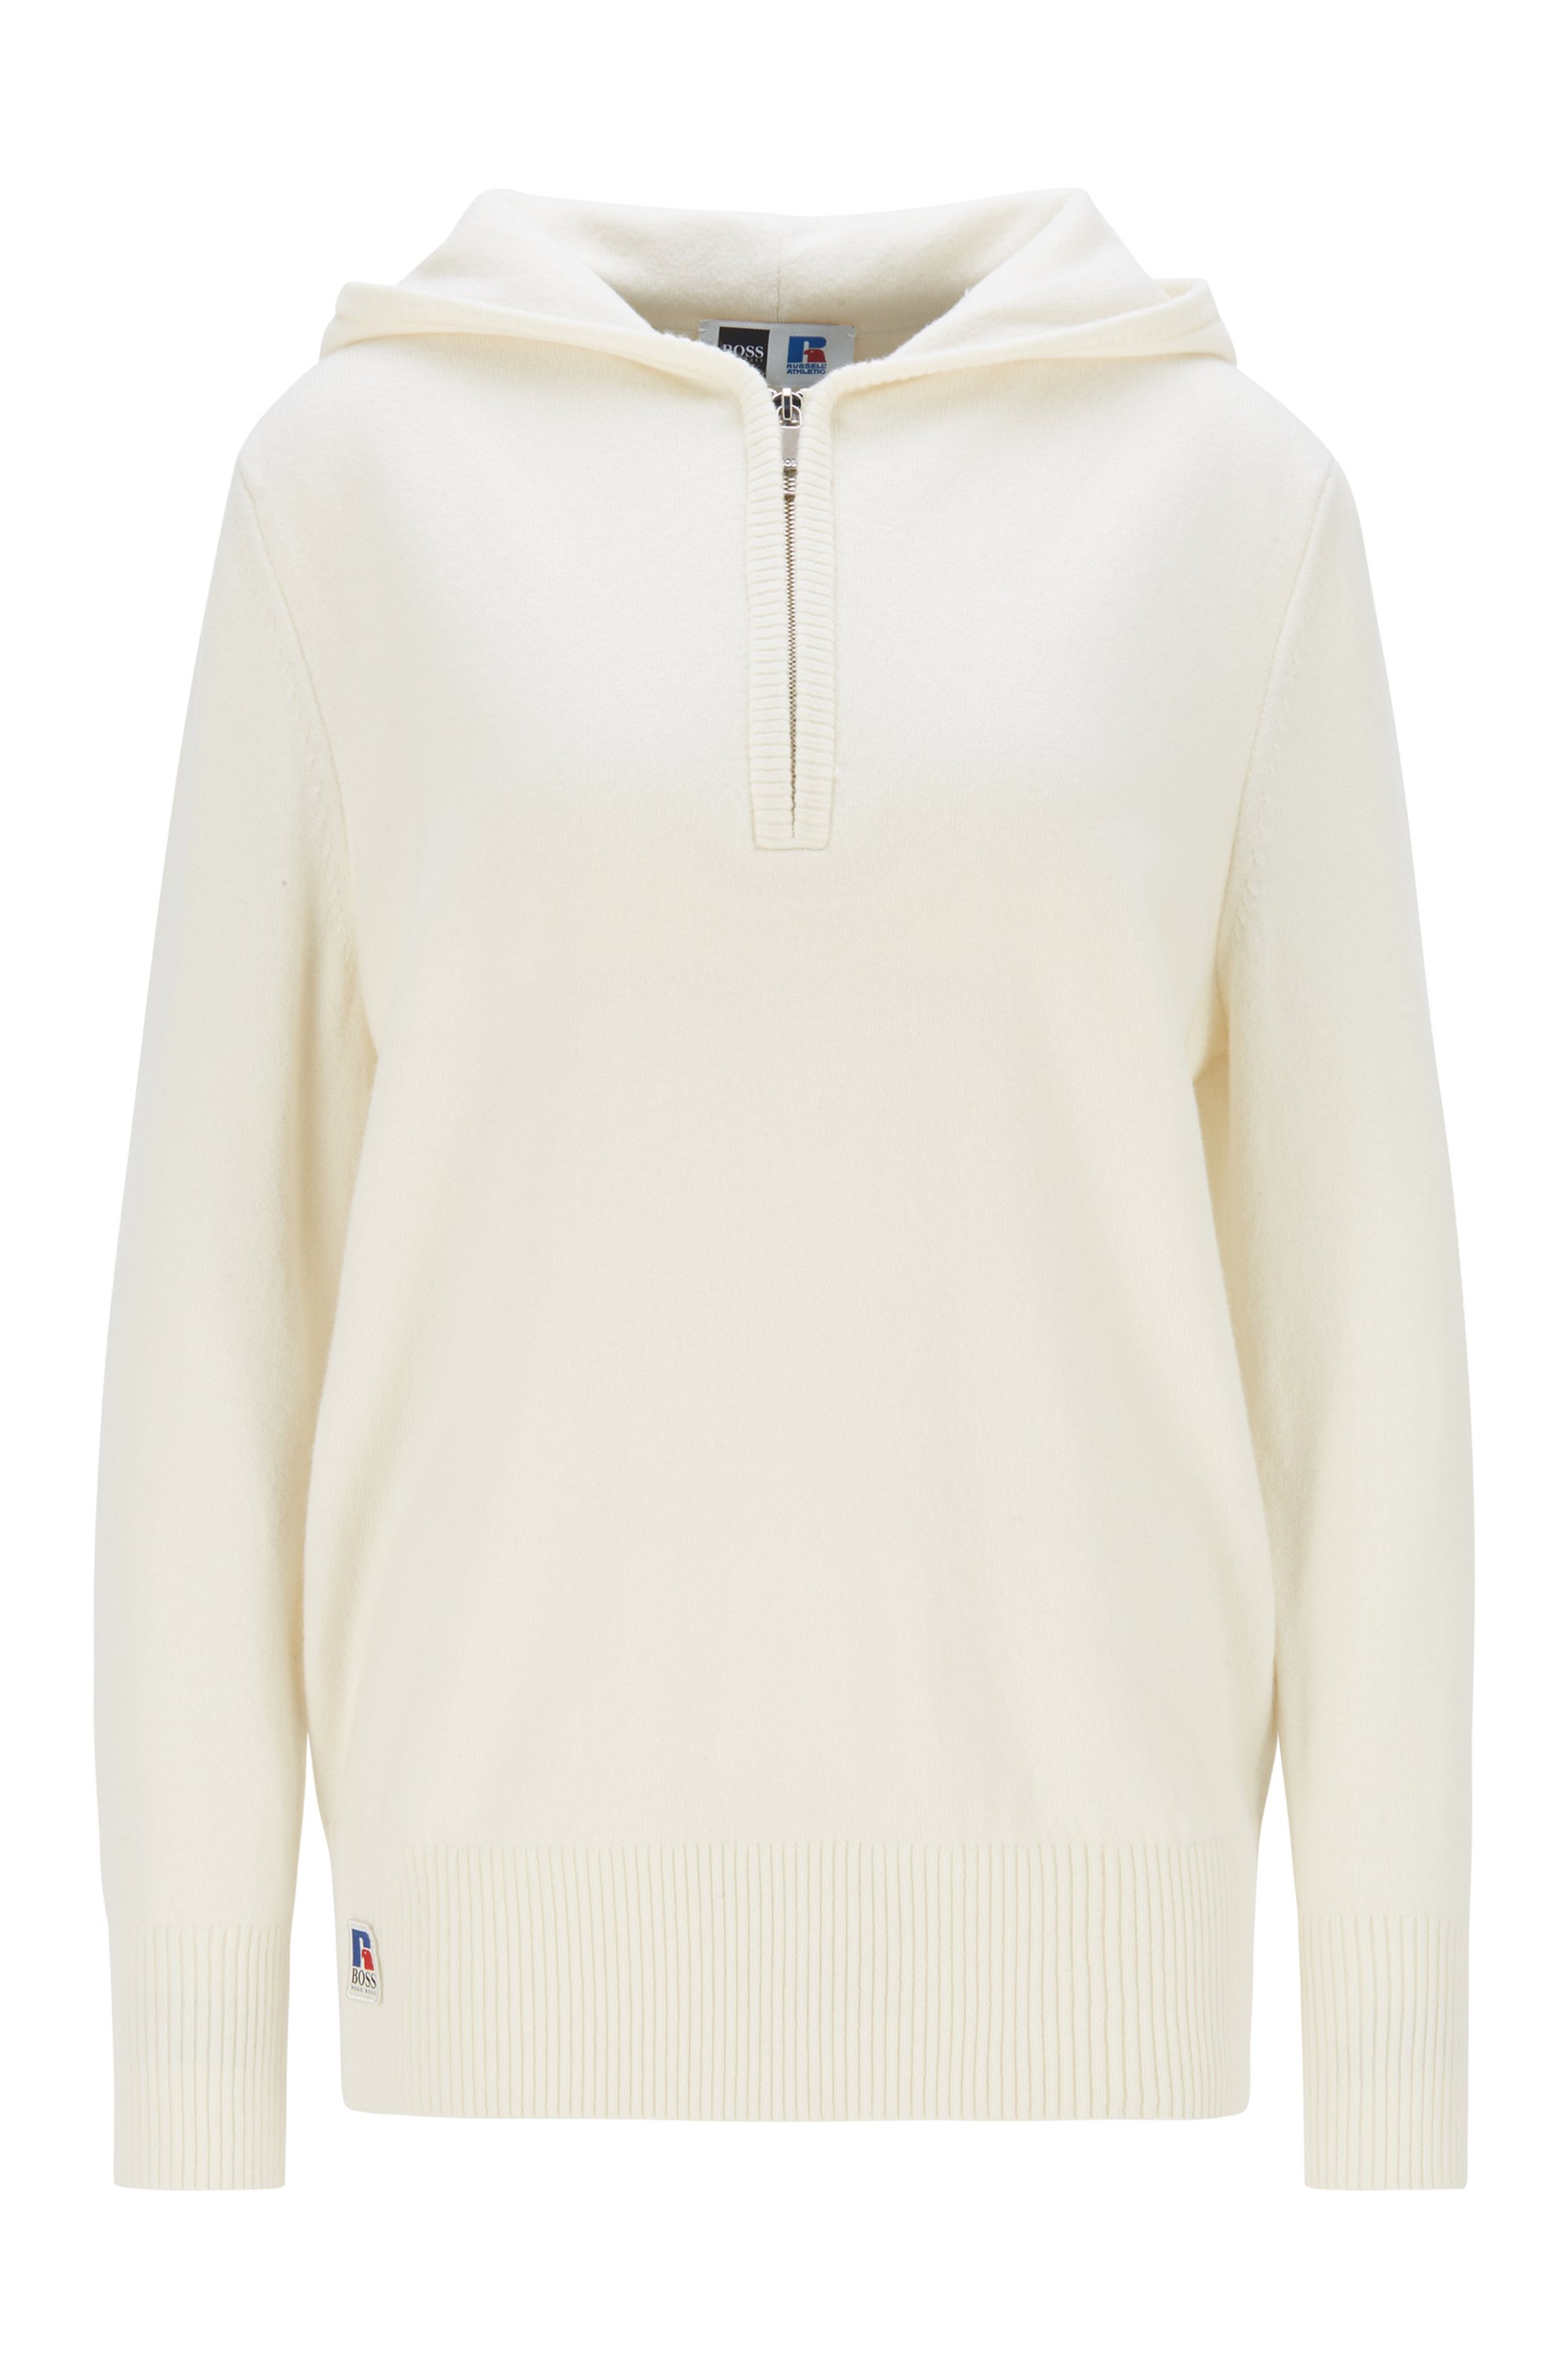 Wool-blend hooded sweater with exclusive logo, White